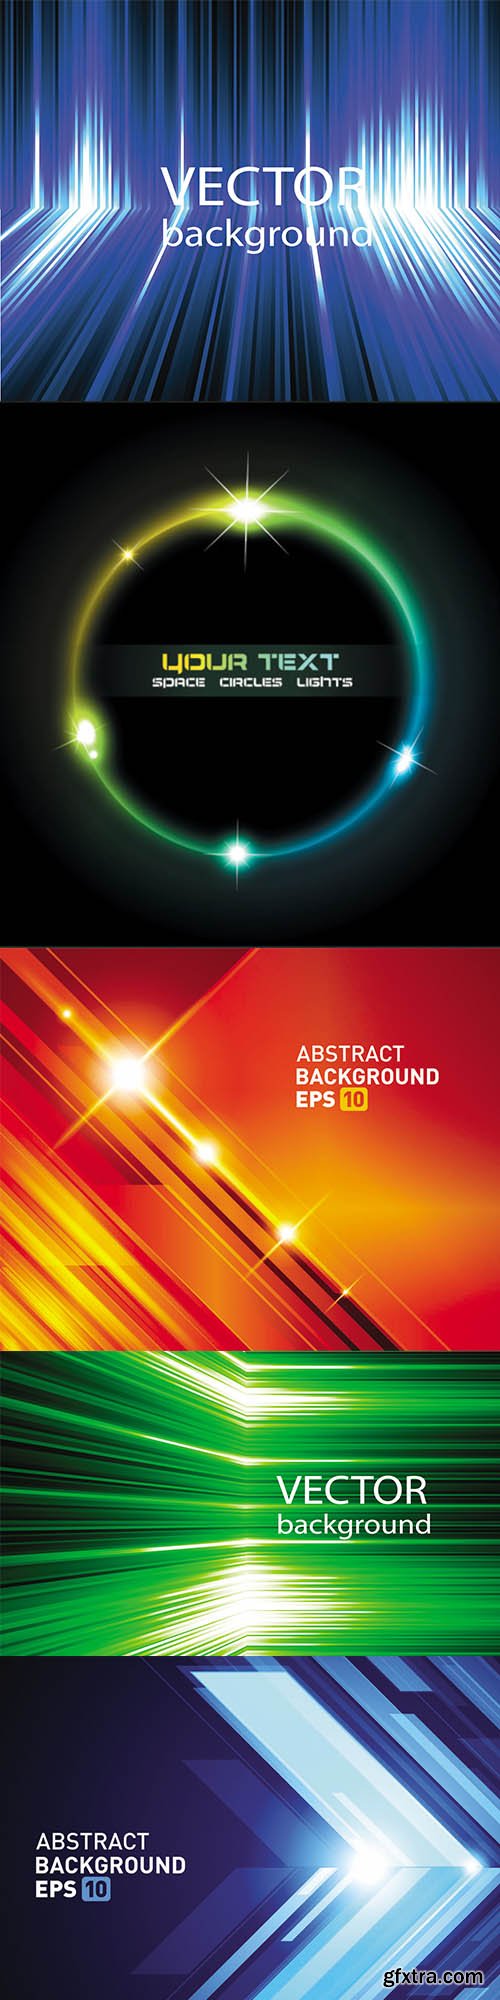 Stylish abstract vector backgrounds set 2